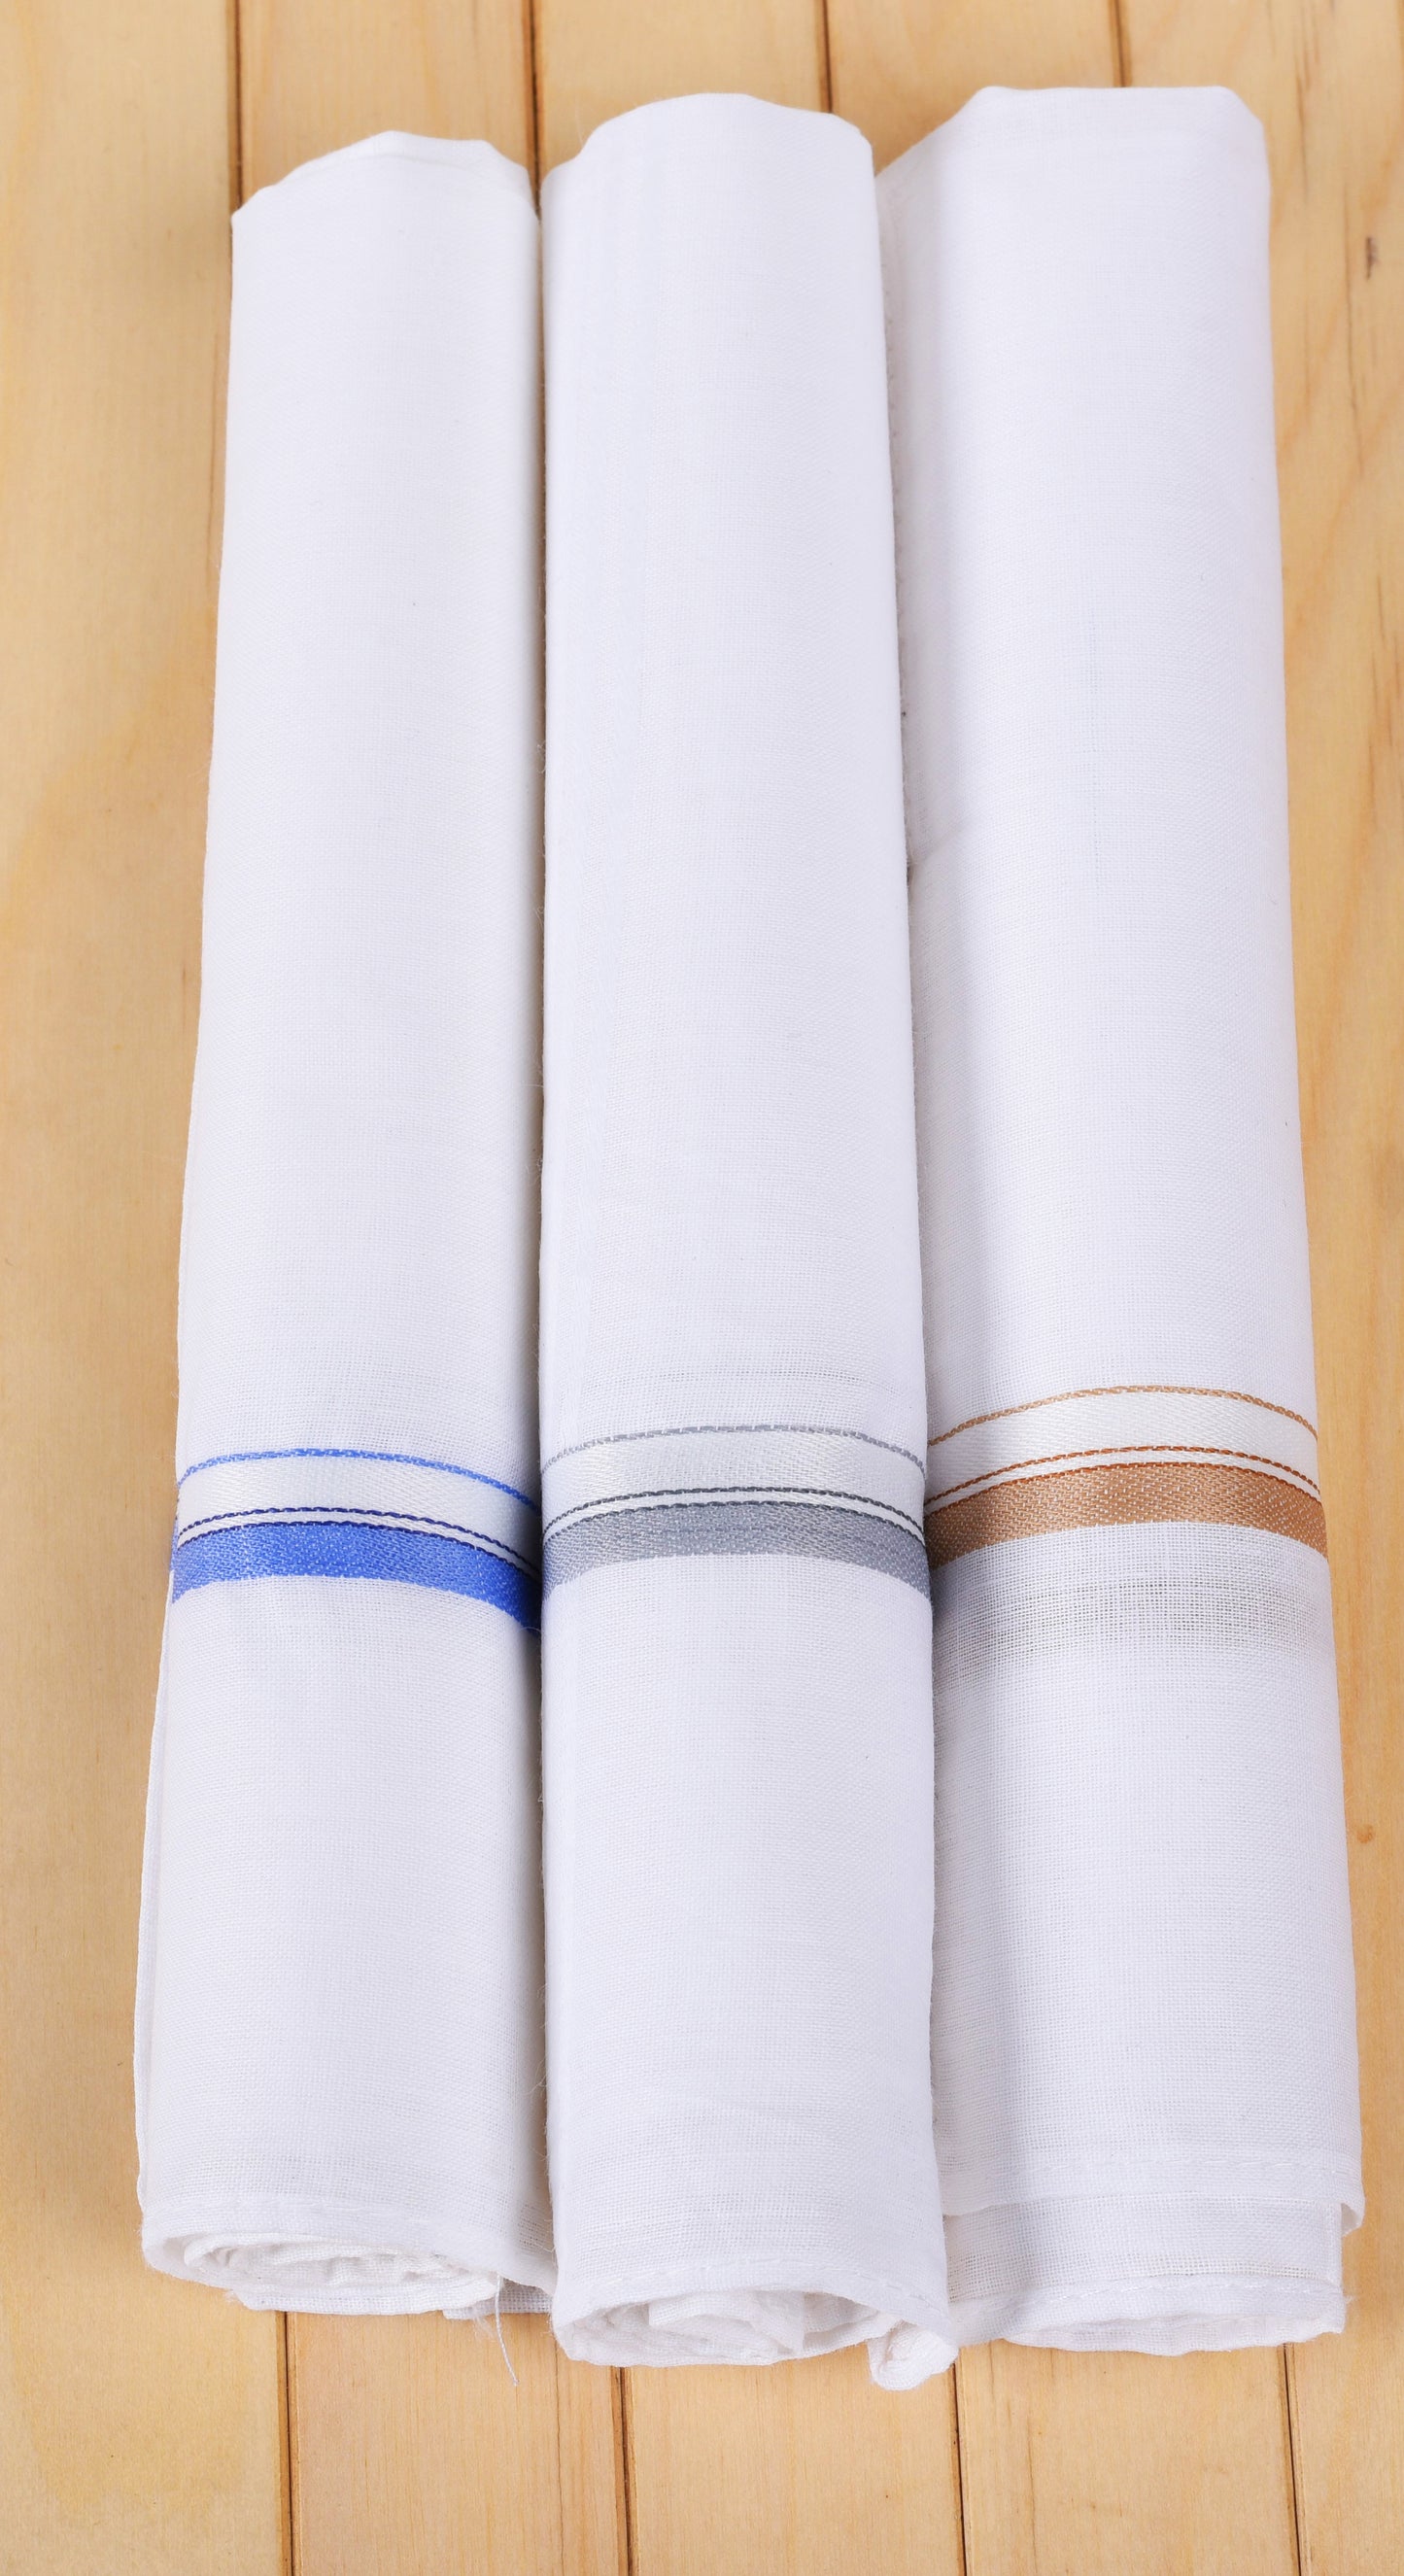 Men's Formal Cotton Handkerchiefs In White Color with Colored Stripes Pack of 3